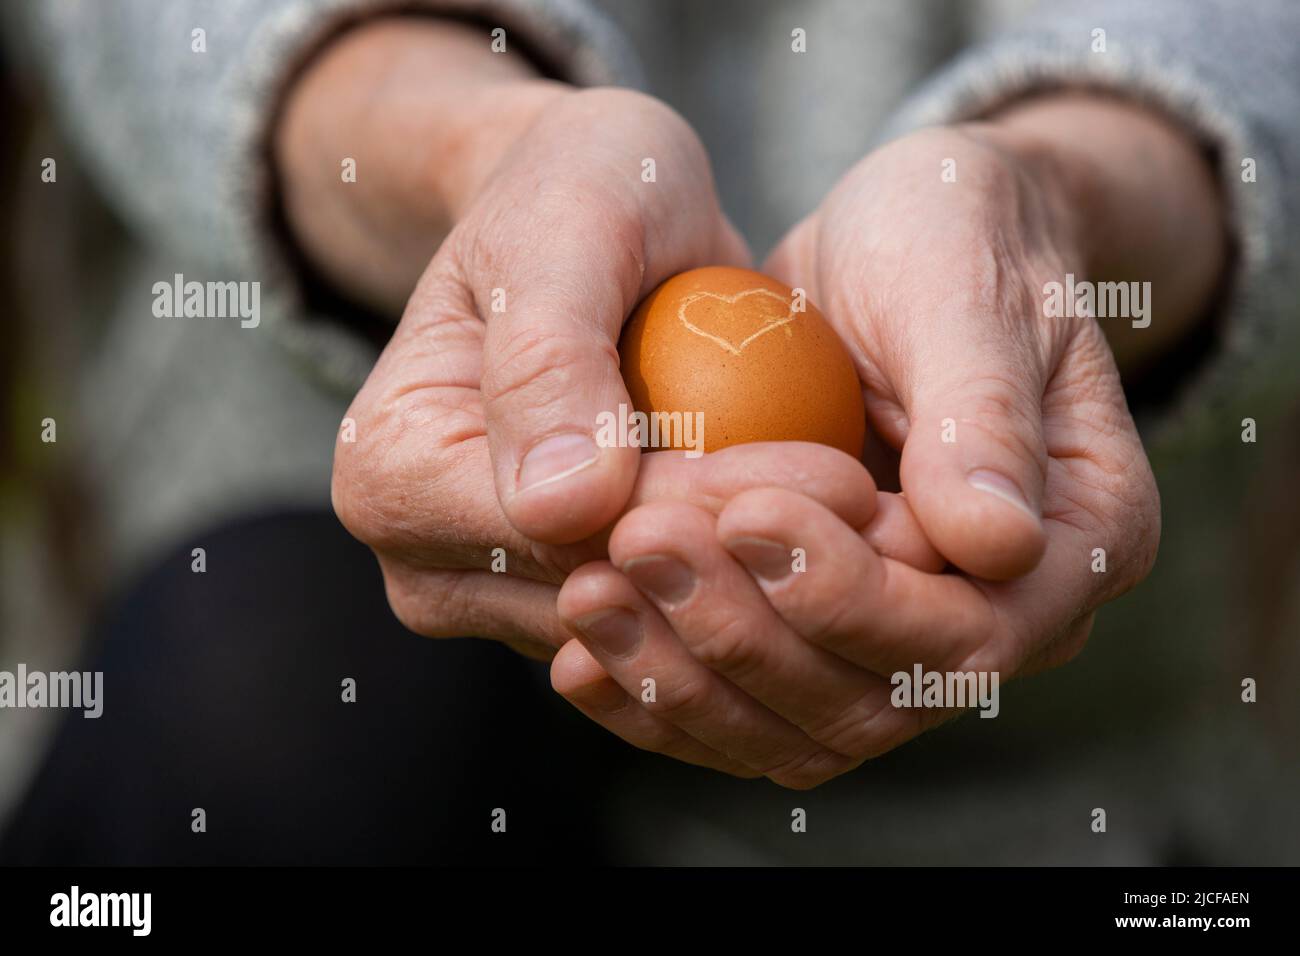 Egg with heart held by hands Stock Photo